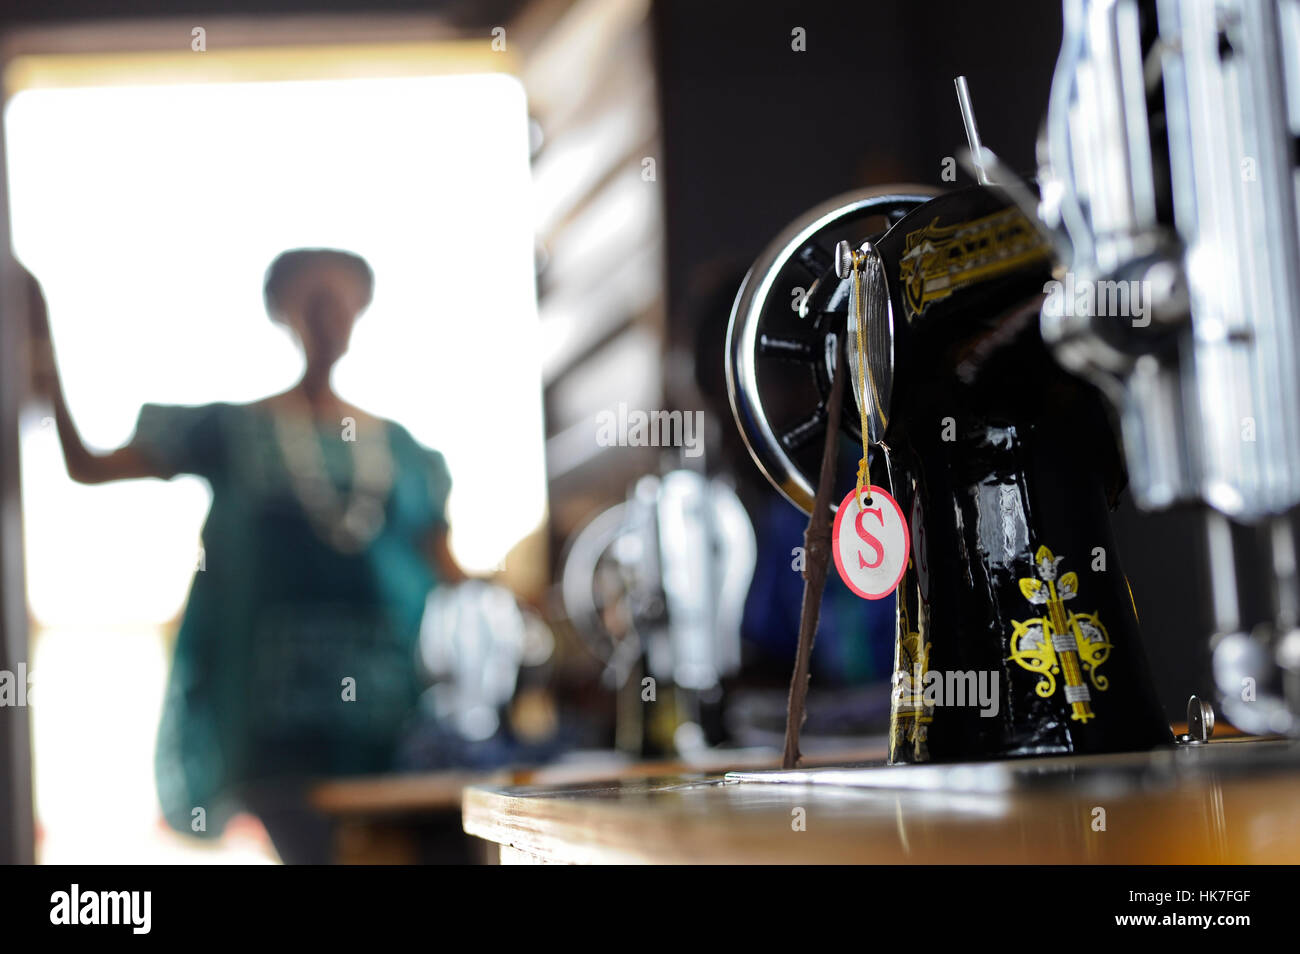 SIERRA LEONE, Waterloo, tailoring centre for women, sewing machine, woman standing in door, out of focus, blurred Stock Photo